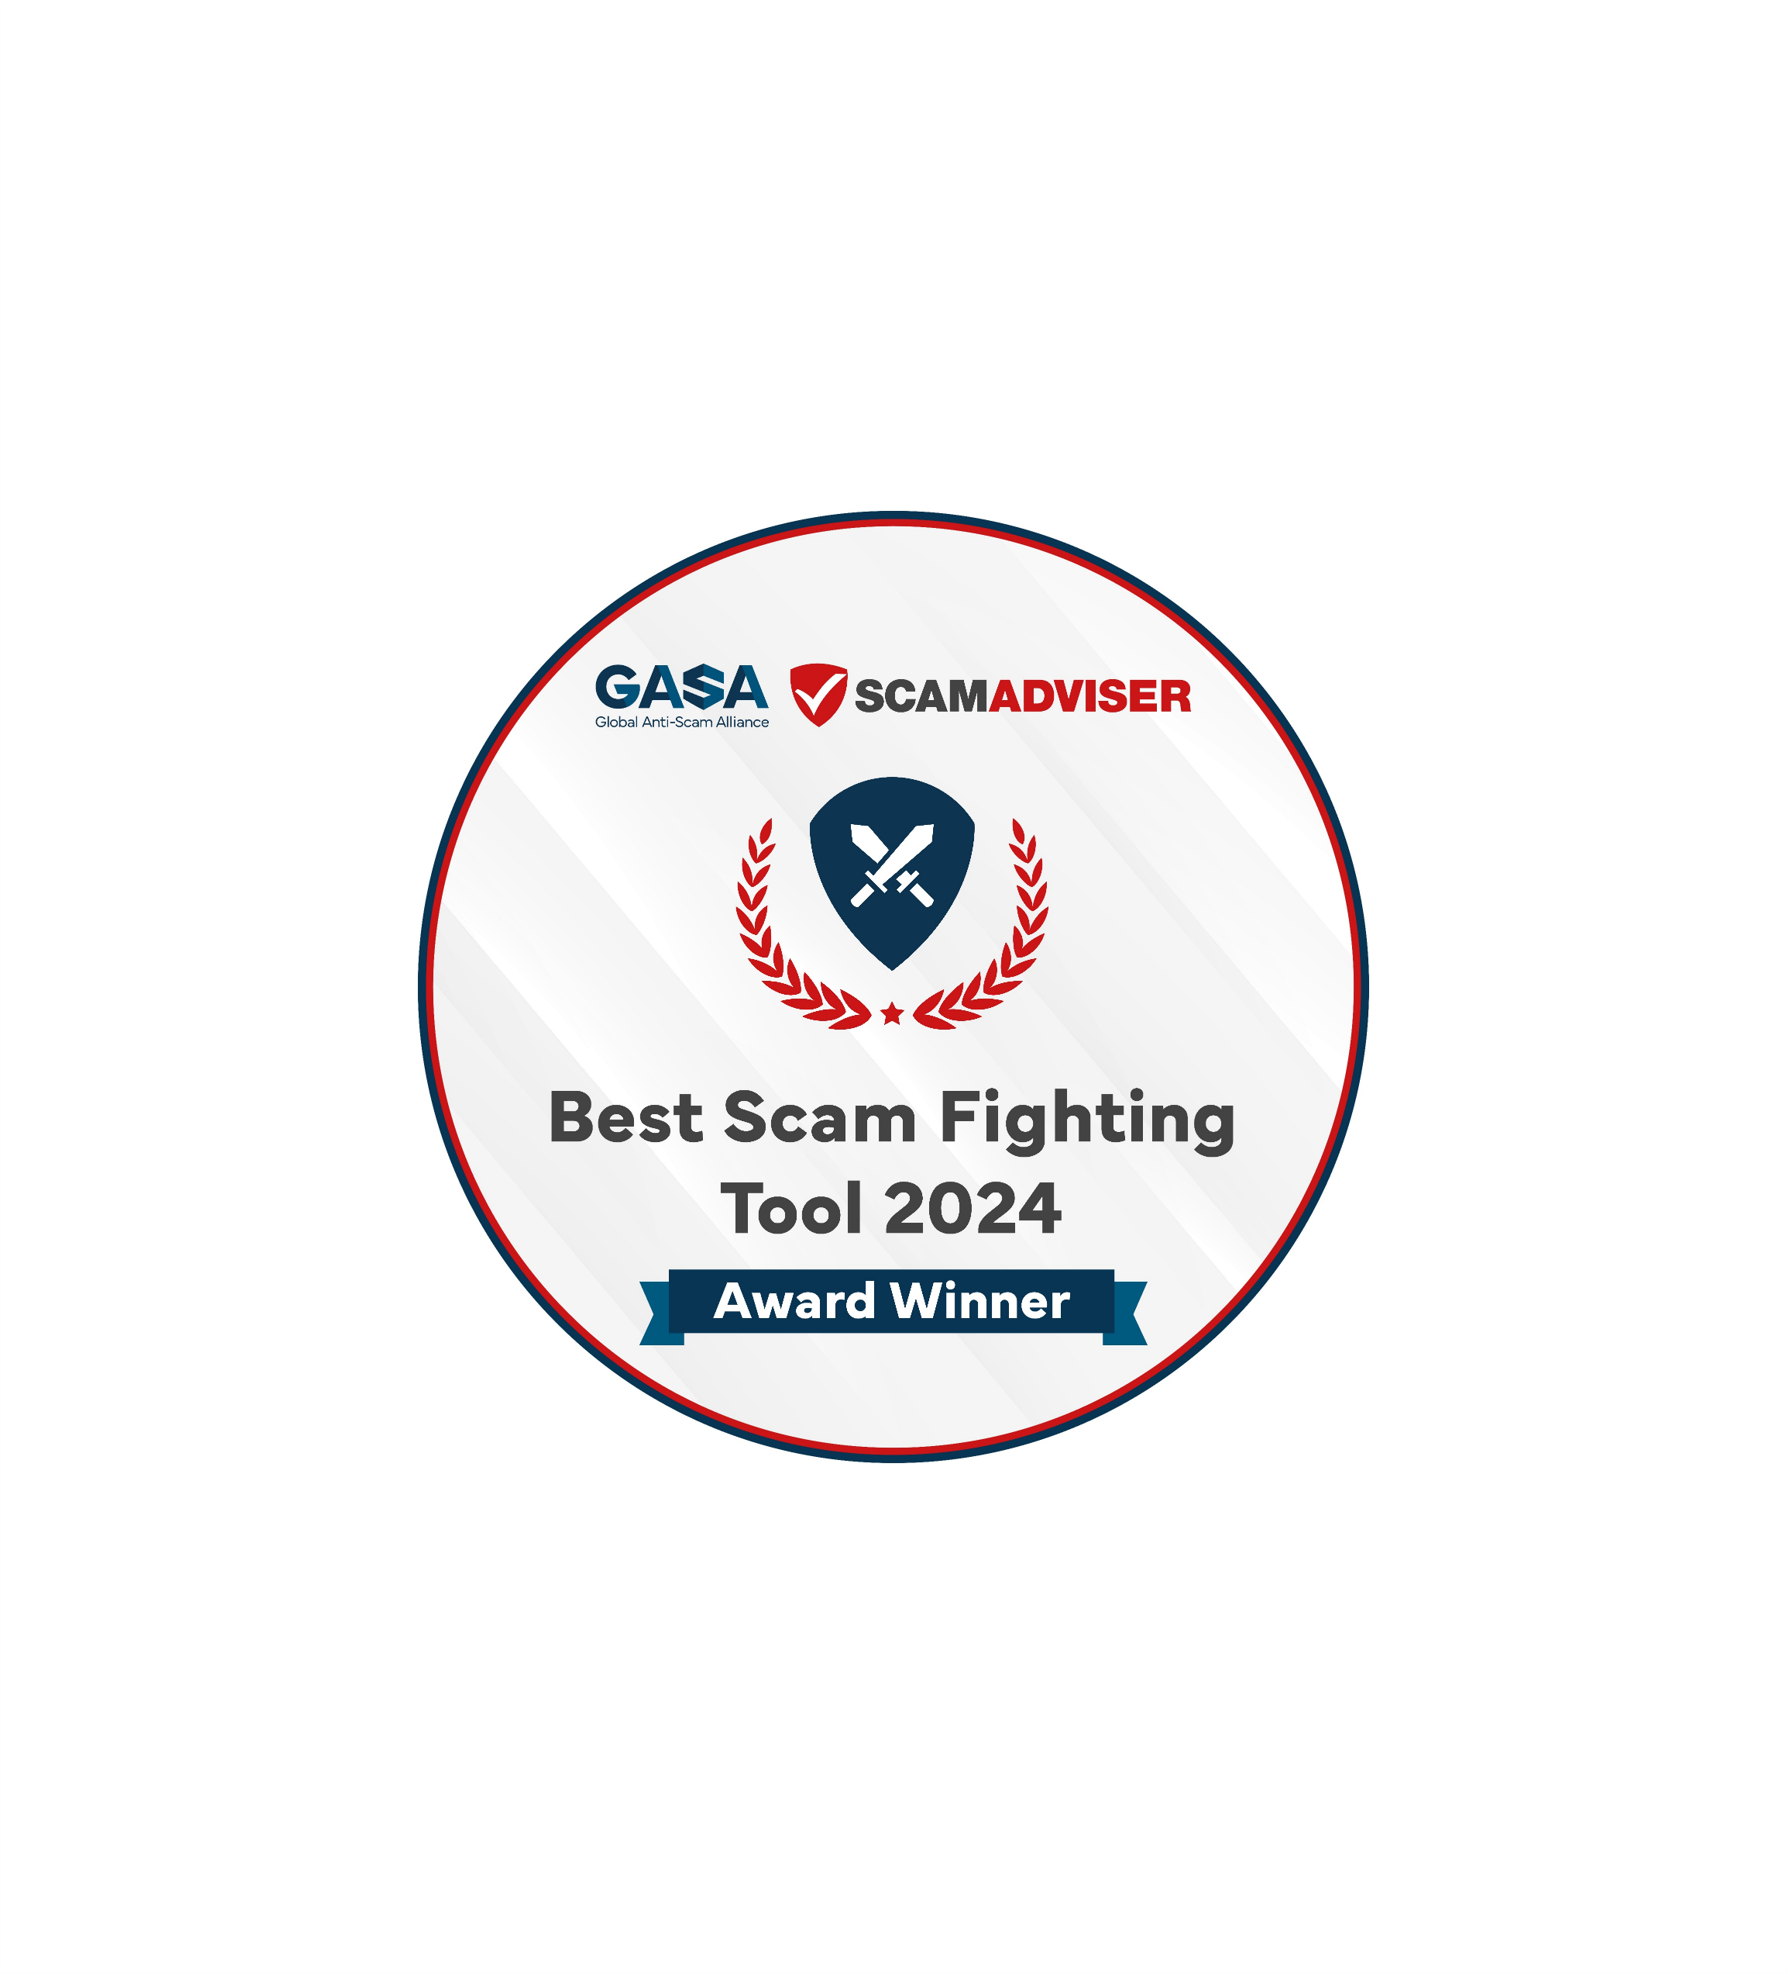 Scam Fighting Tool of the Year award with GASA and scam advisor logos